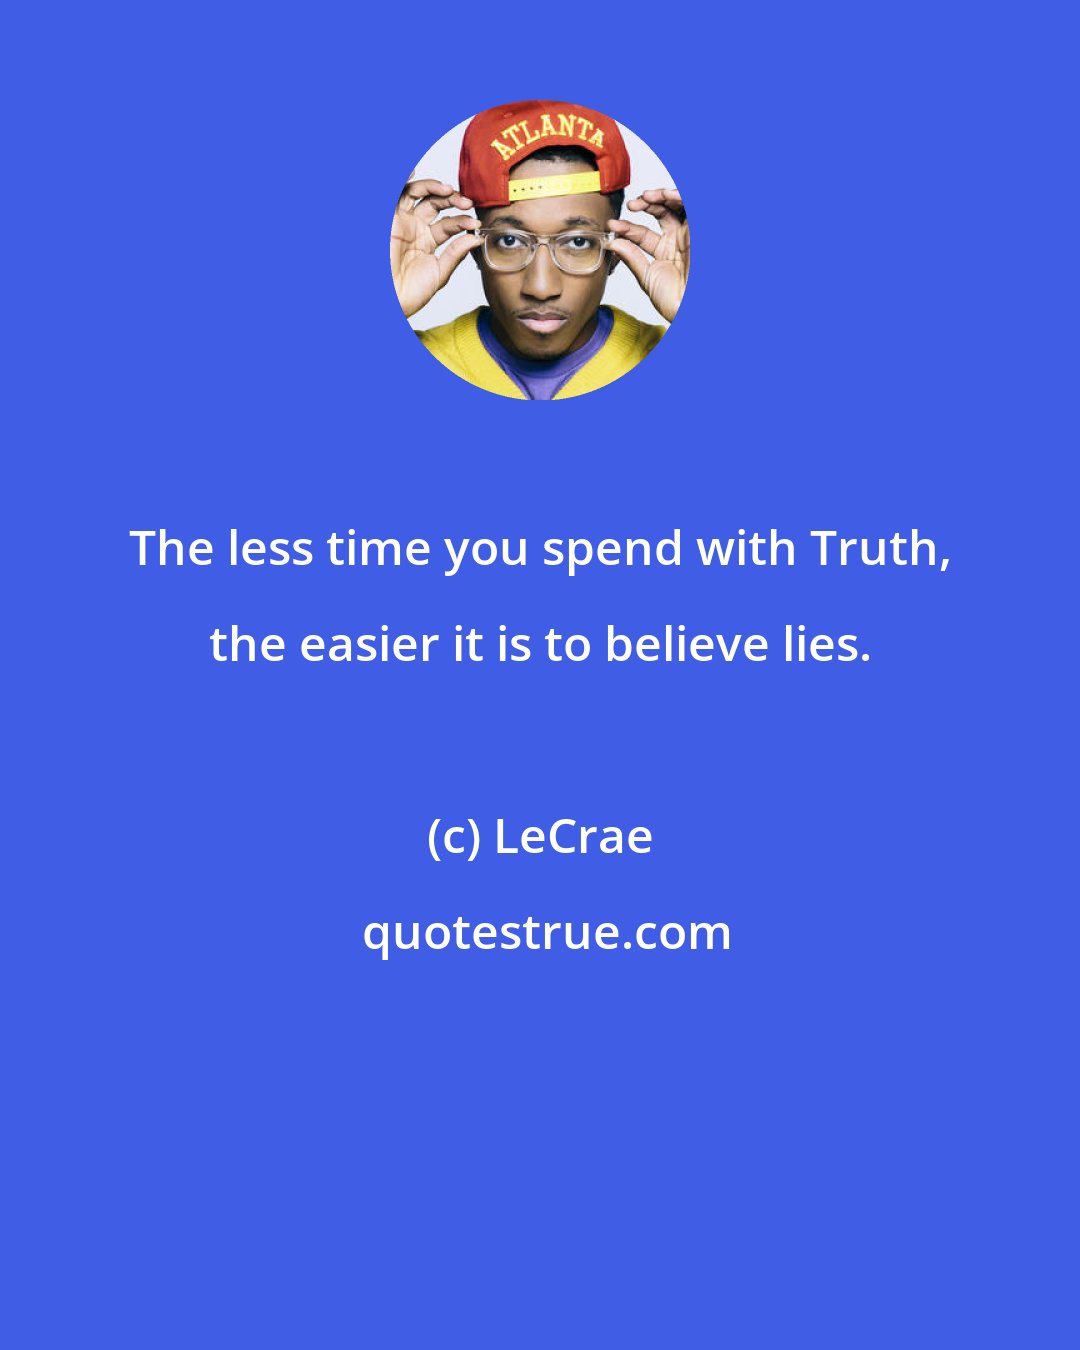 LeCrae: The less time you spend with Truth, the easier it is to believe lies.